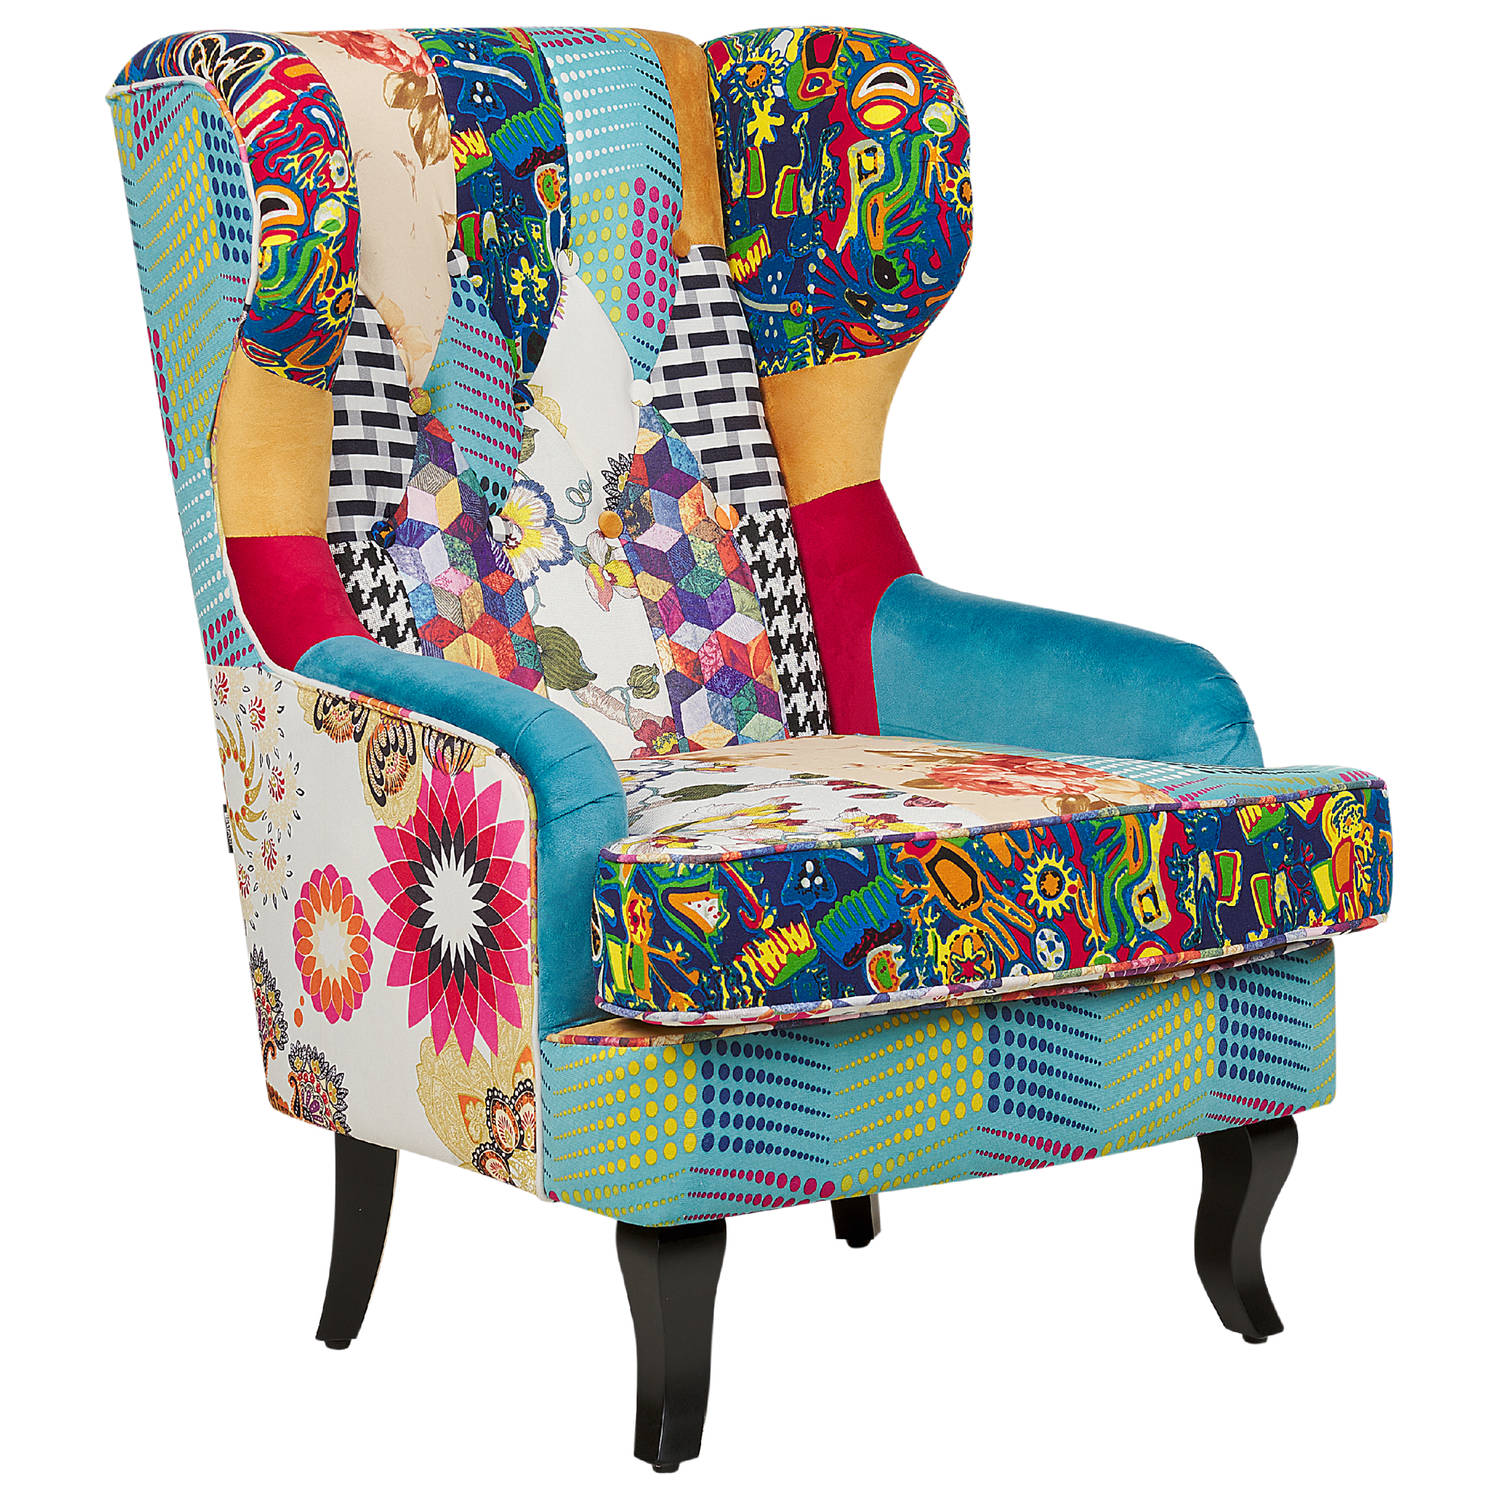 MOLDE - Chesterfield fauteuil - Patchwork/Blauw - Polyester